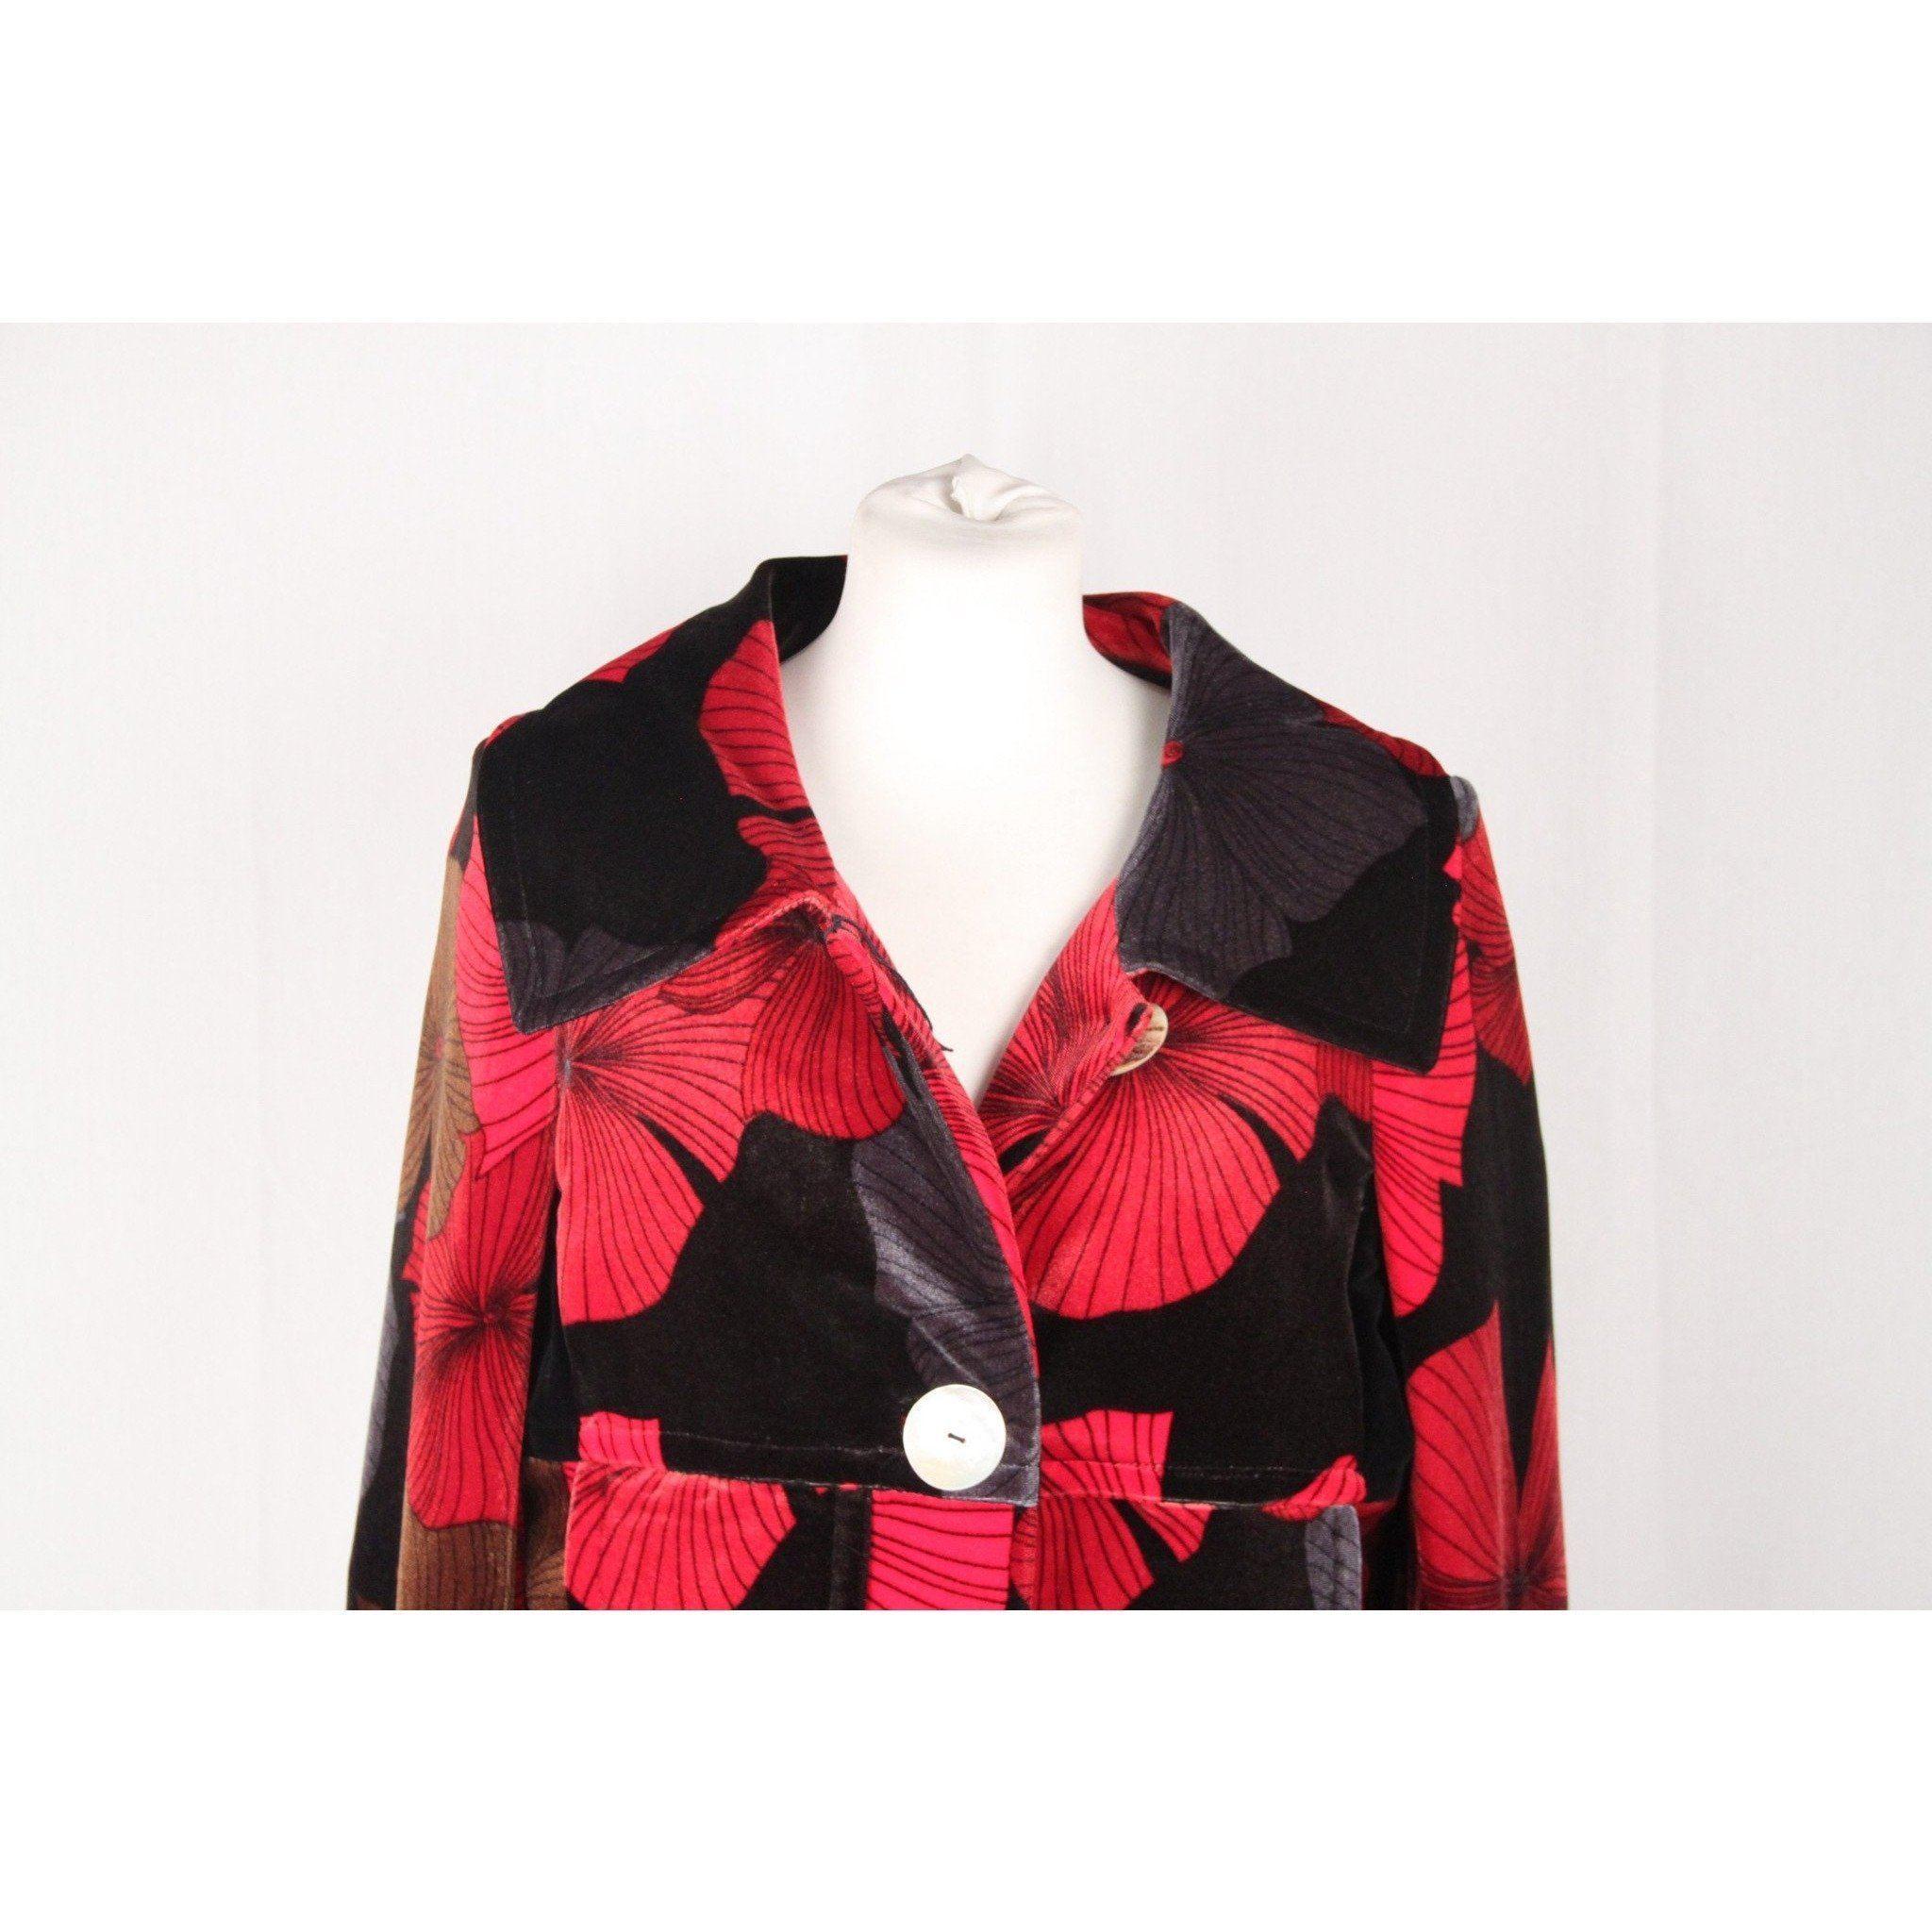 Material: Velvet Color / Effect: Black & Red / Floral pattern Internal lining (color, fabric): Black satin lining Size: 40 IT (The size shown for this item is the size indicated by the designer on the label). It should corresond to a SMALL size